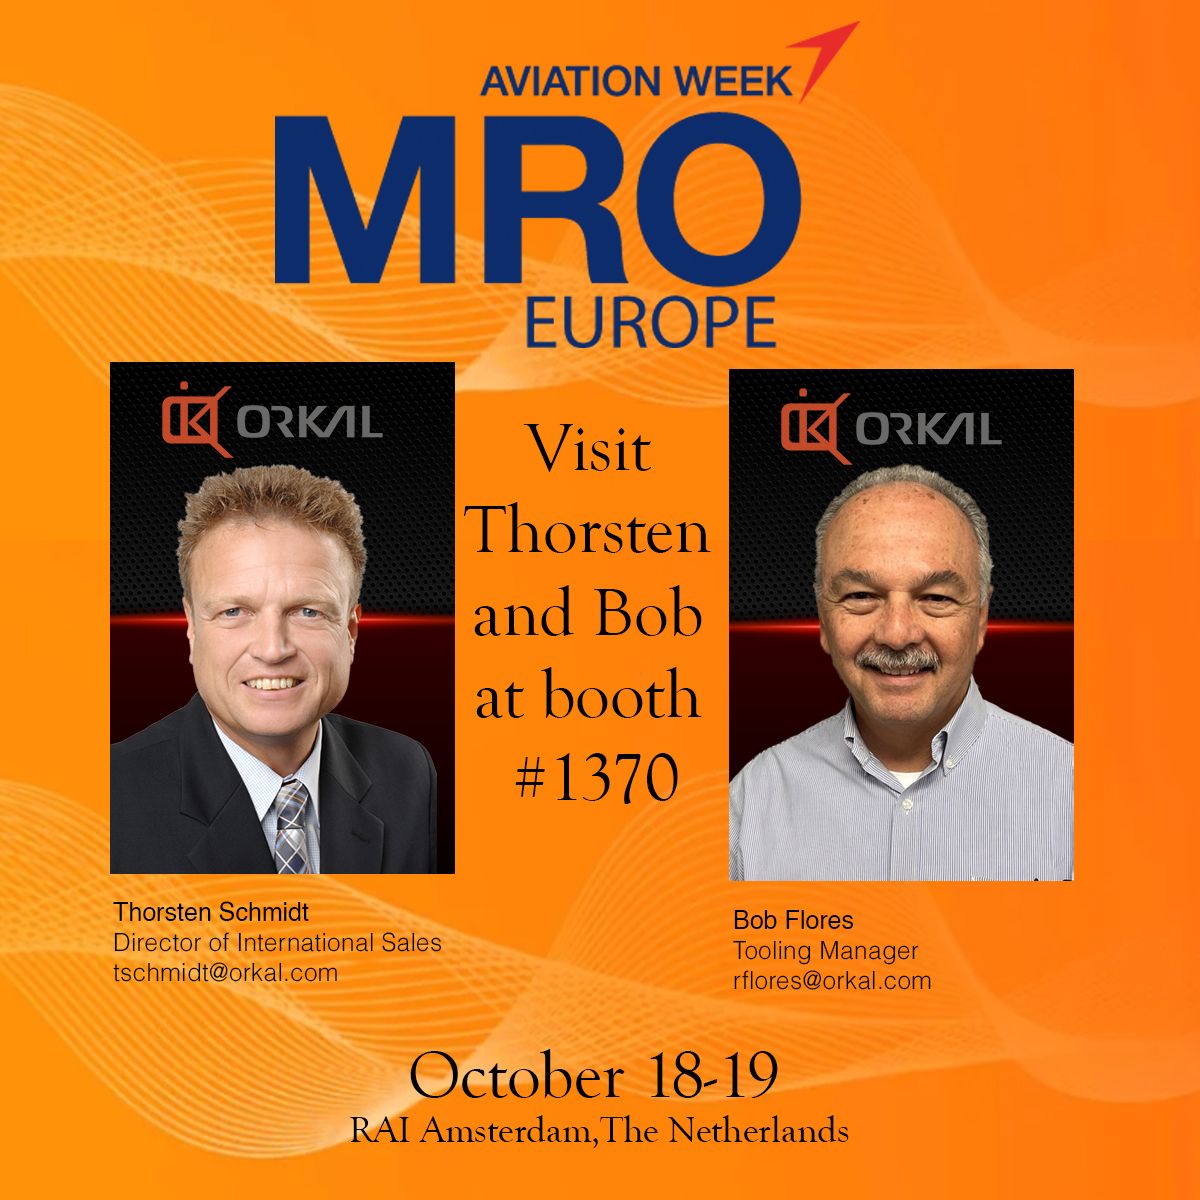 promotional image for the mro europe exhibit featuring photos of thorsten schmidt and bob flores with an invitation to visit booth 1370 at rai amsterdam.